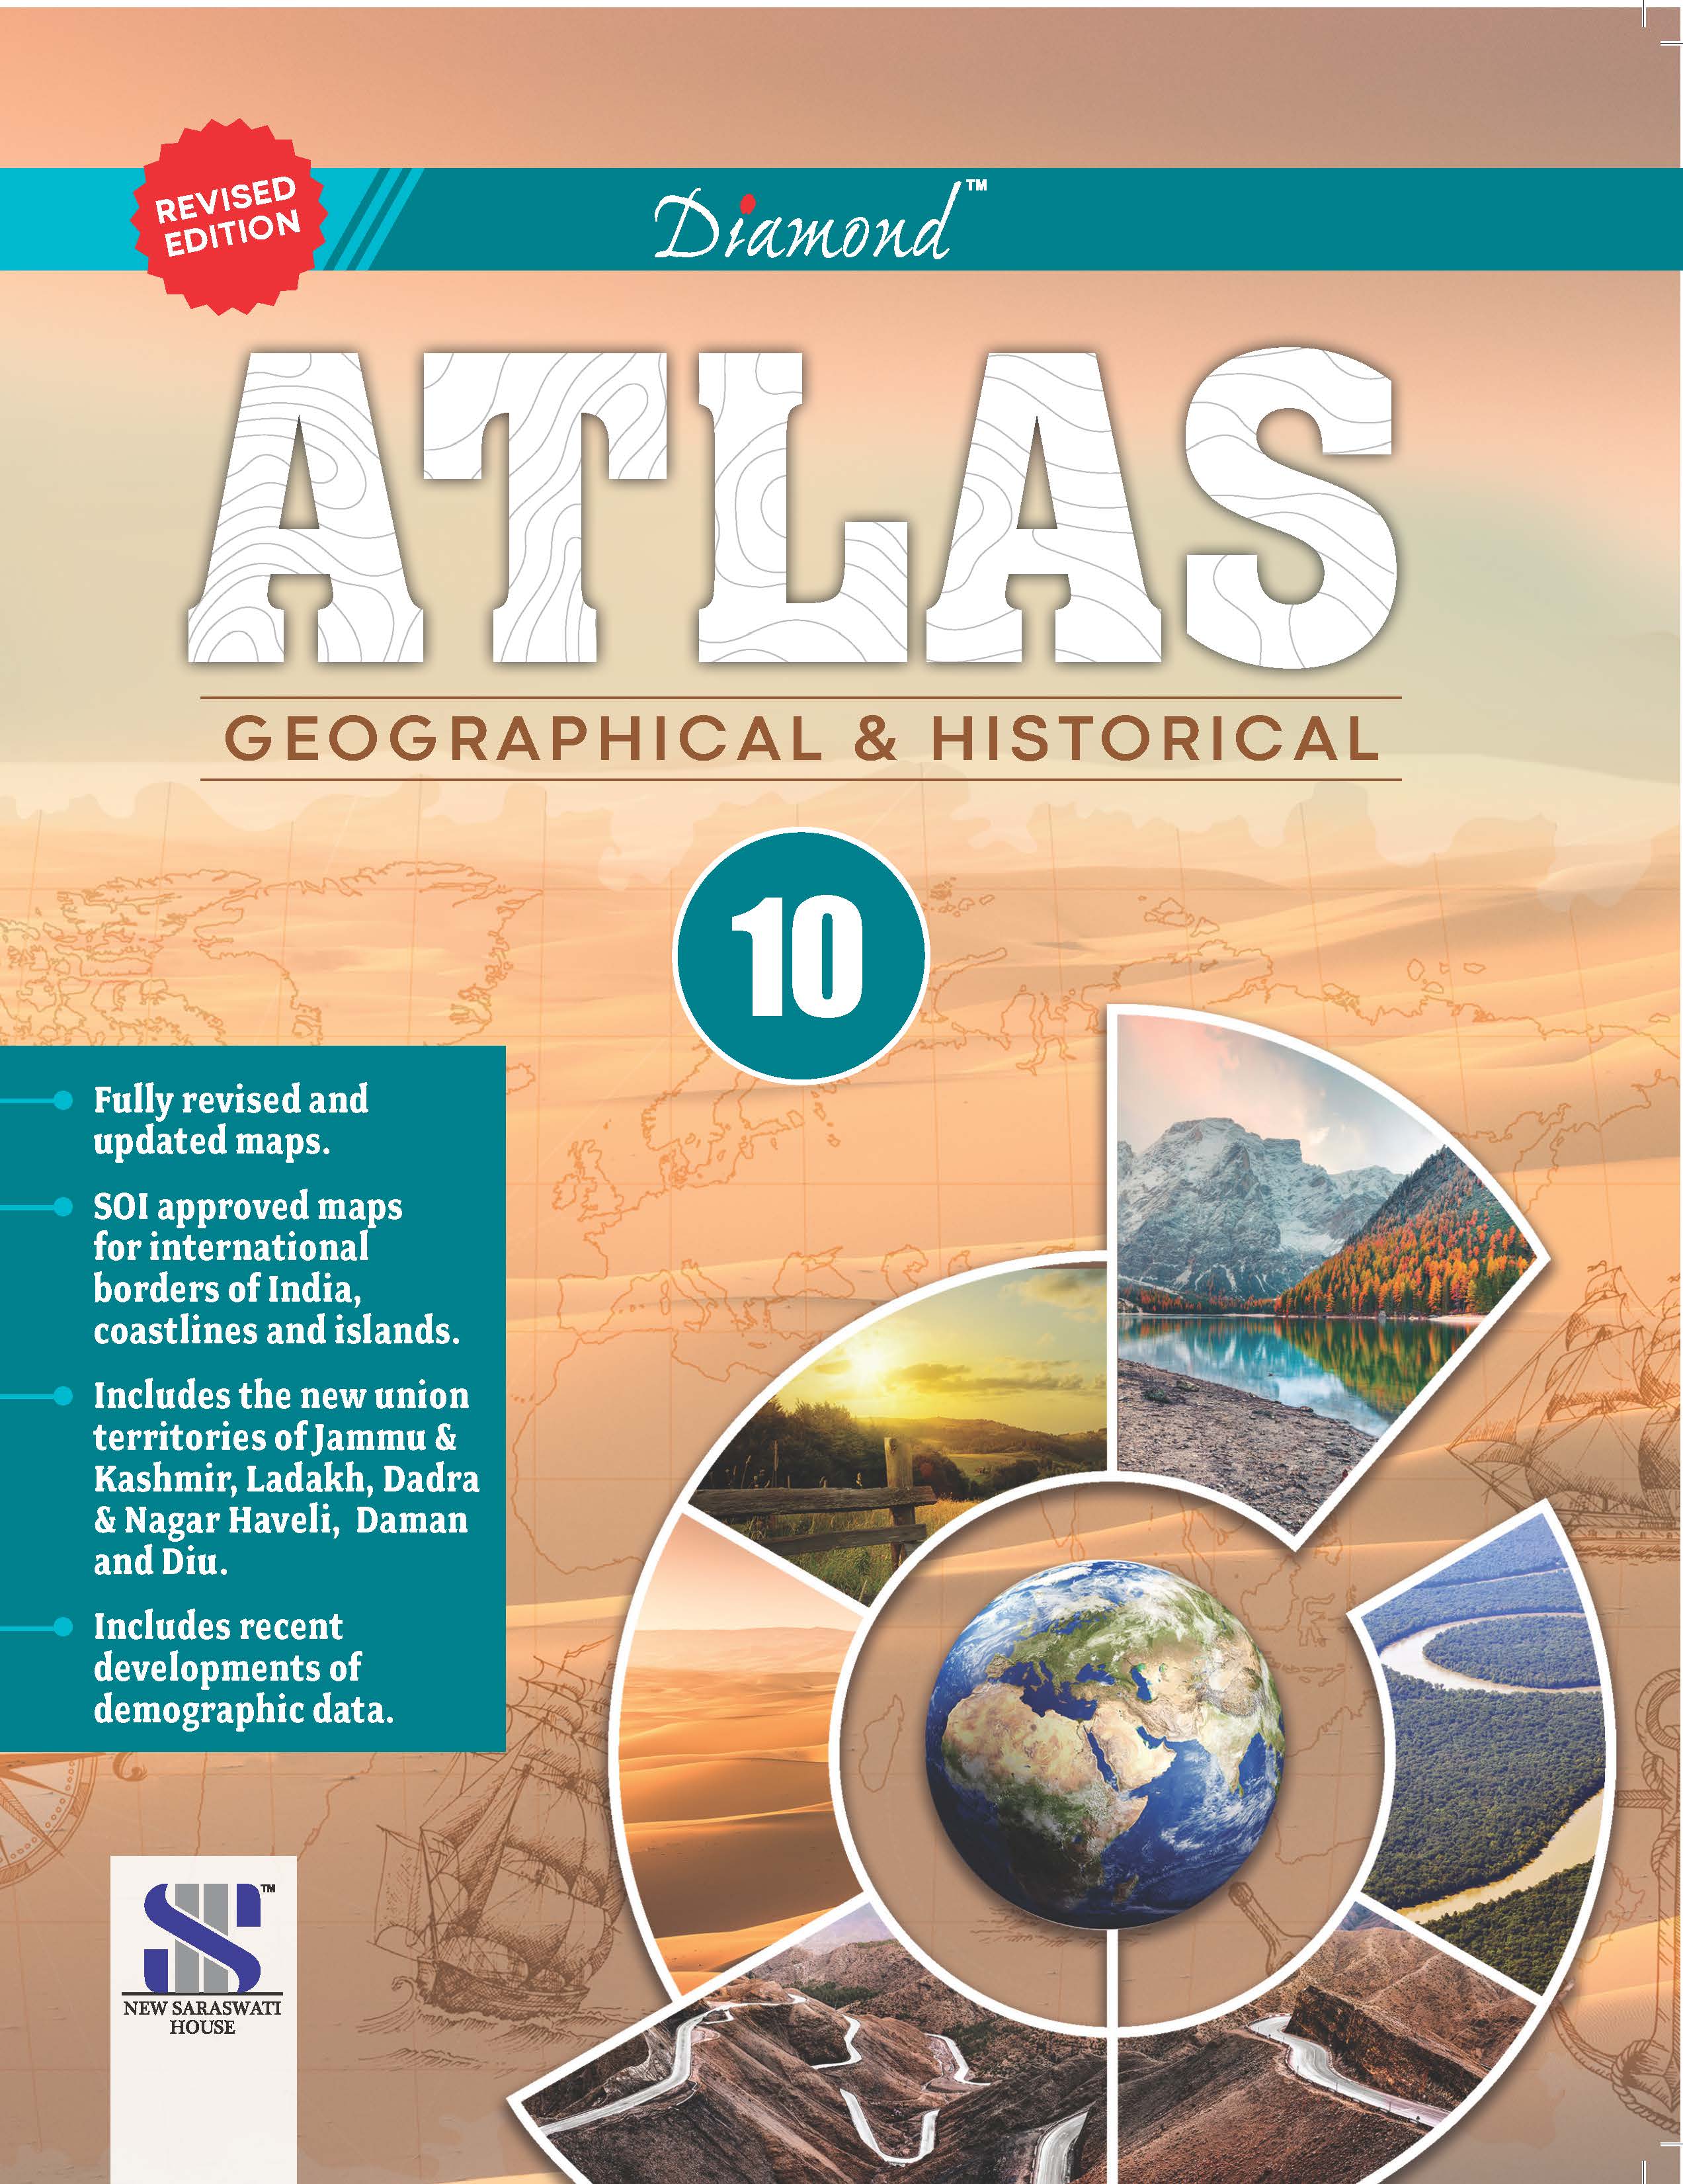 Diamond Geographical and Historical Atlas-10